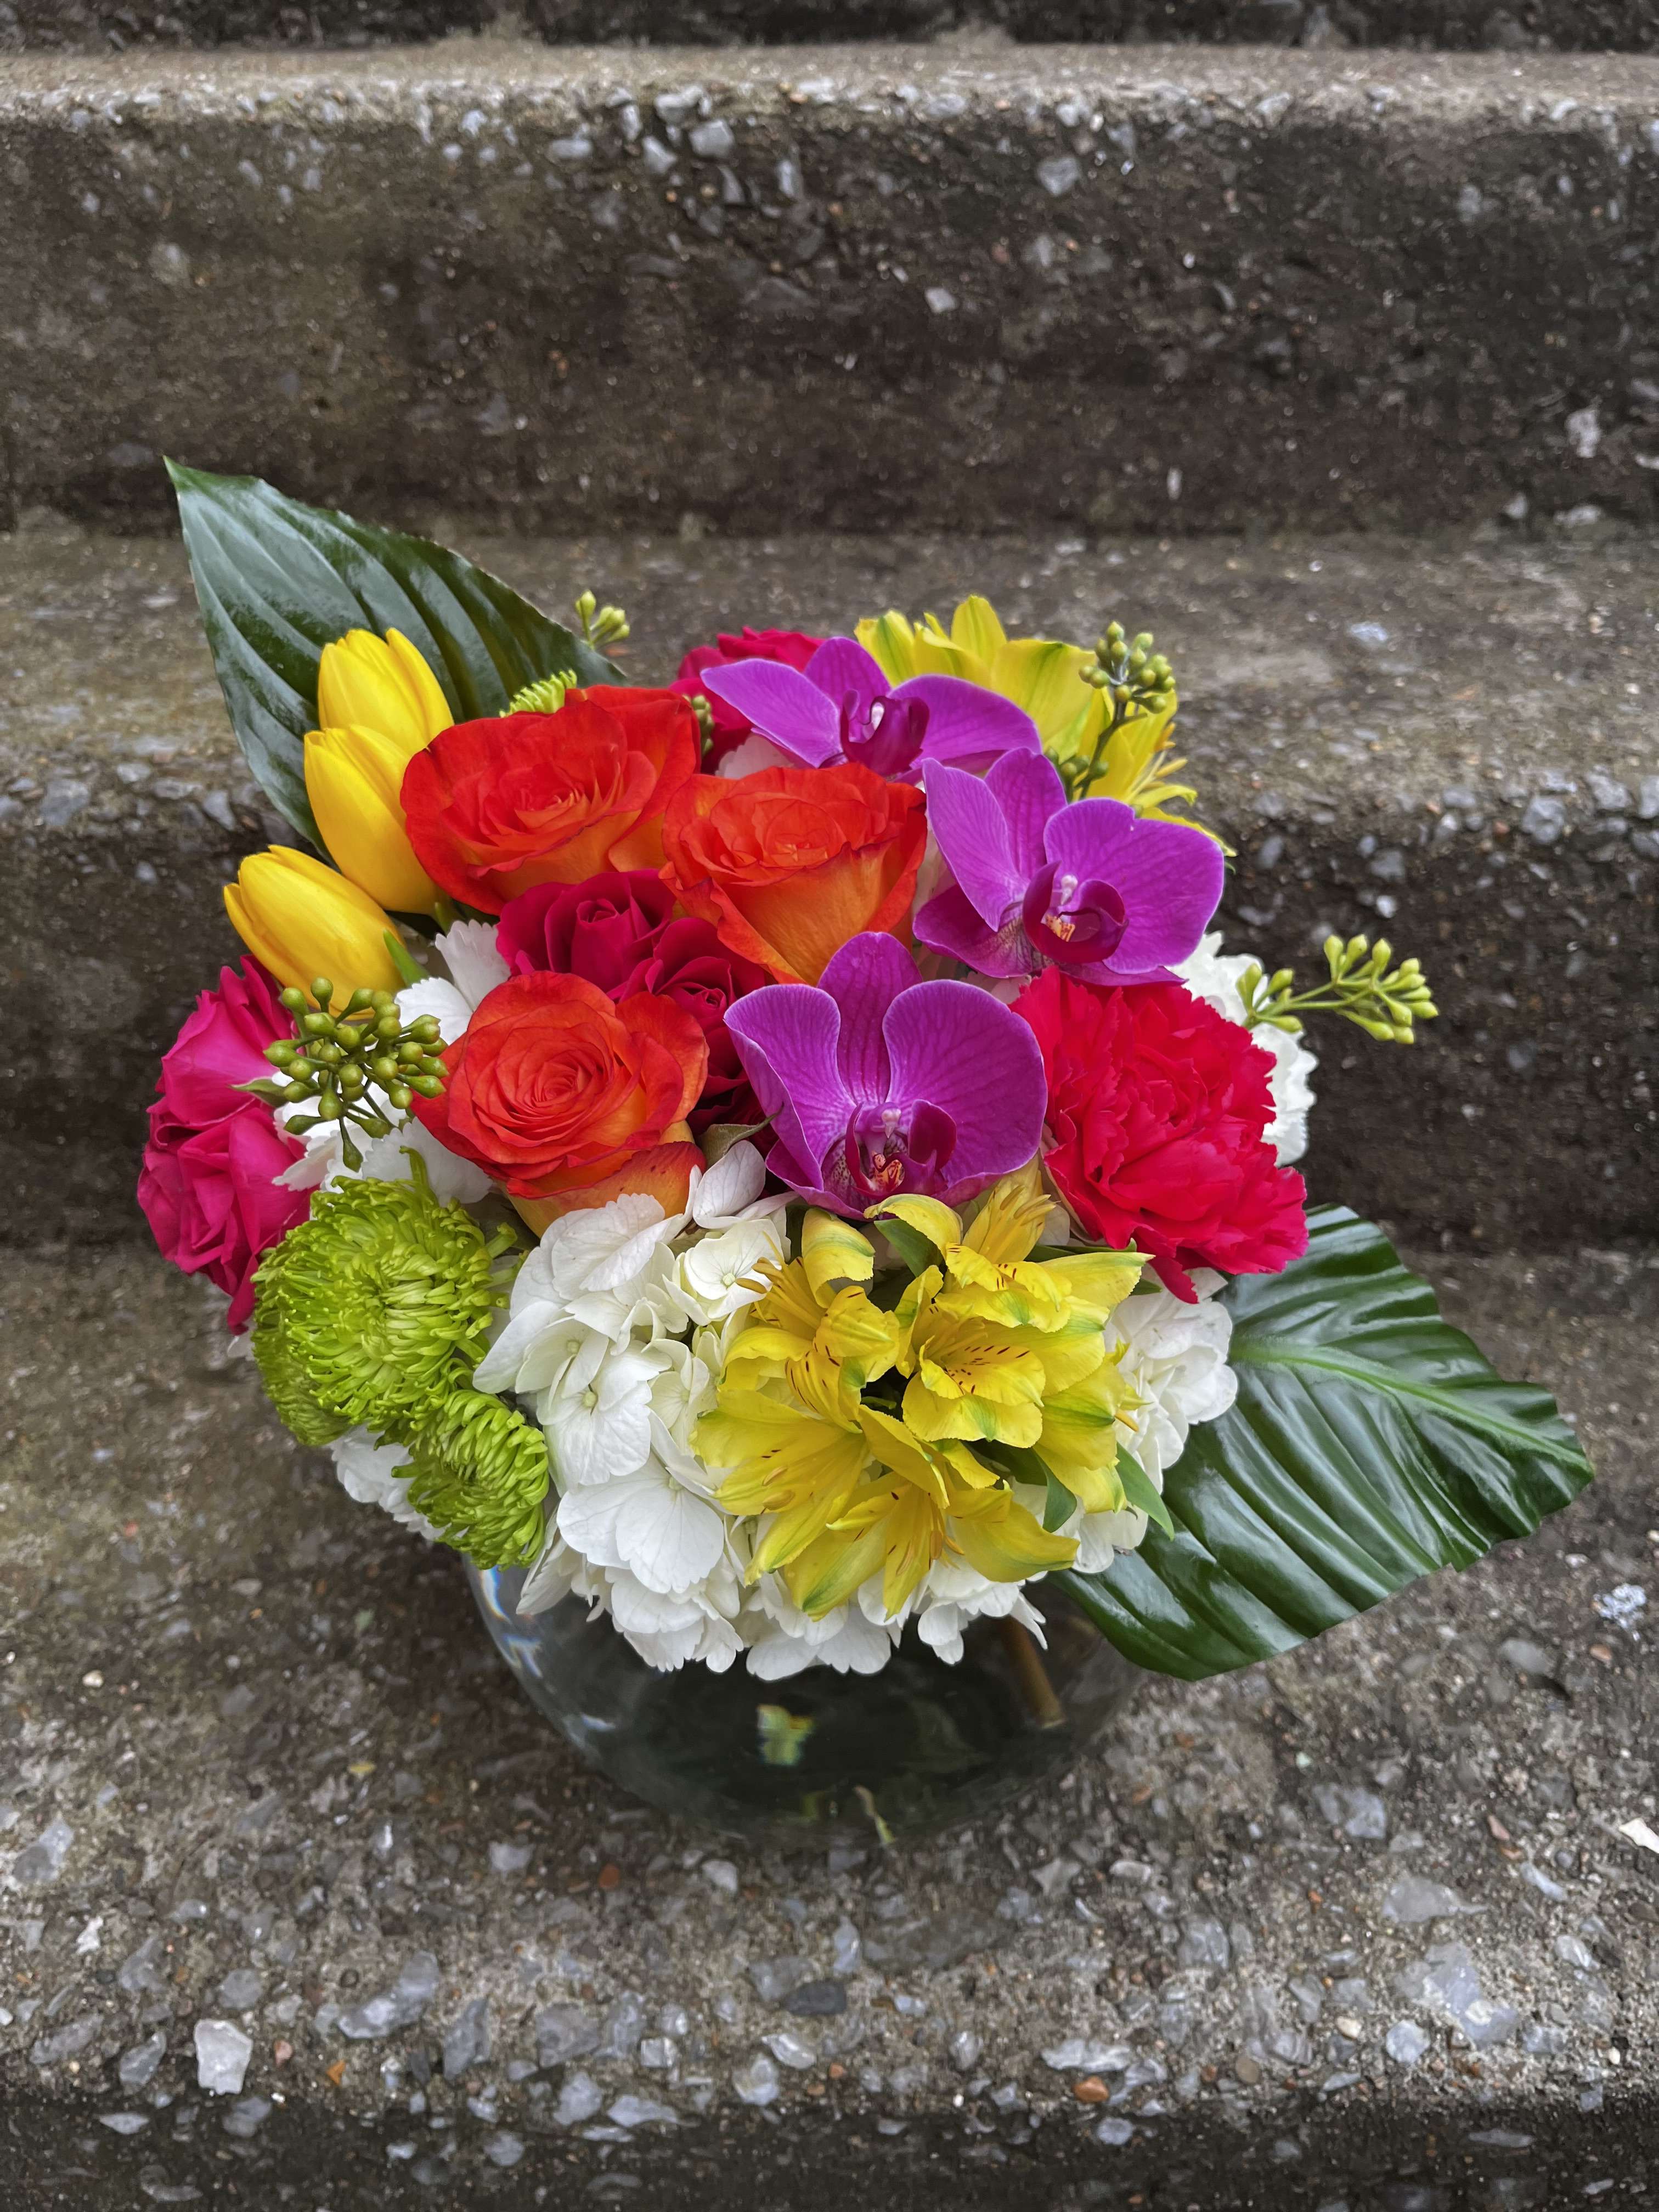 Tropical Day Dream - This arrangement has three orchid flowers, hydrangeas, alstroemeria, roses, tulips, spray roses, buttons, carnations, and beautiful greenery. The Orchid color may be changed based on availability.